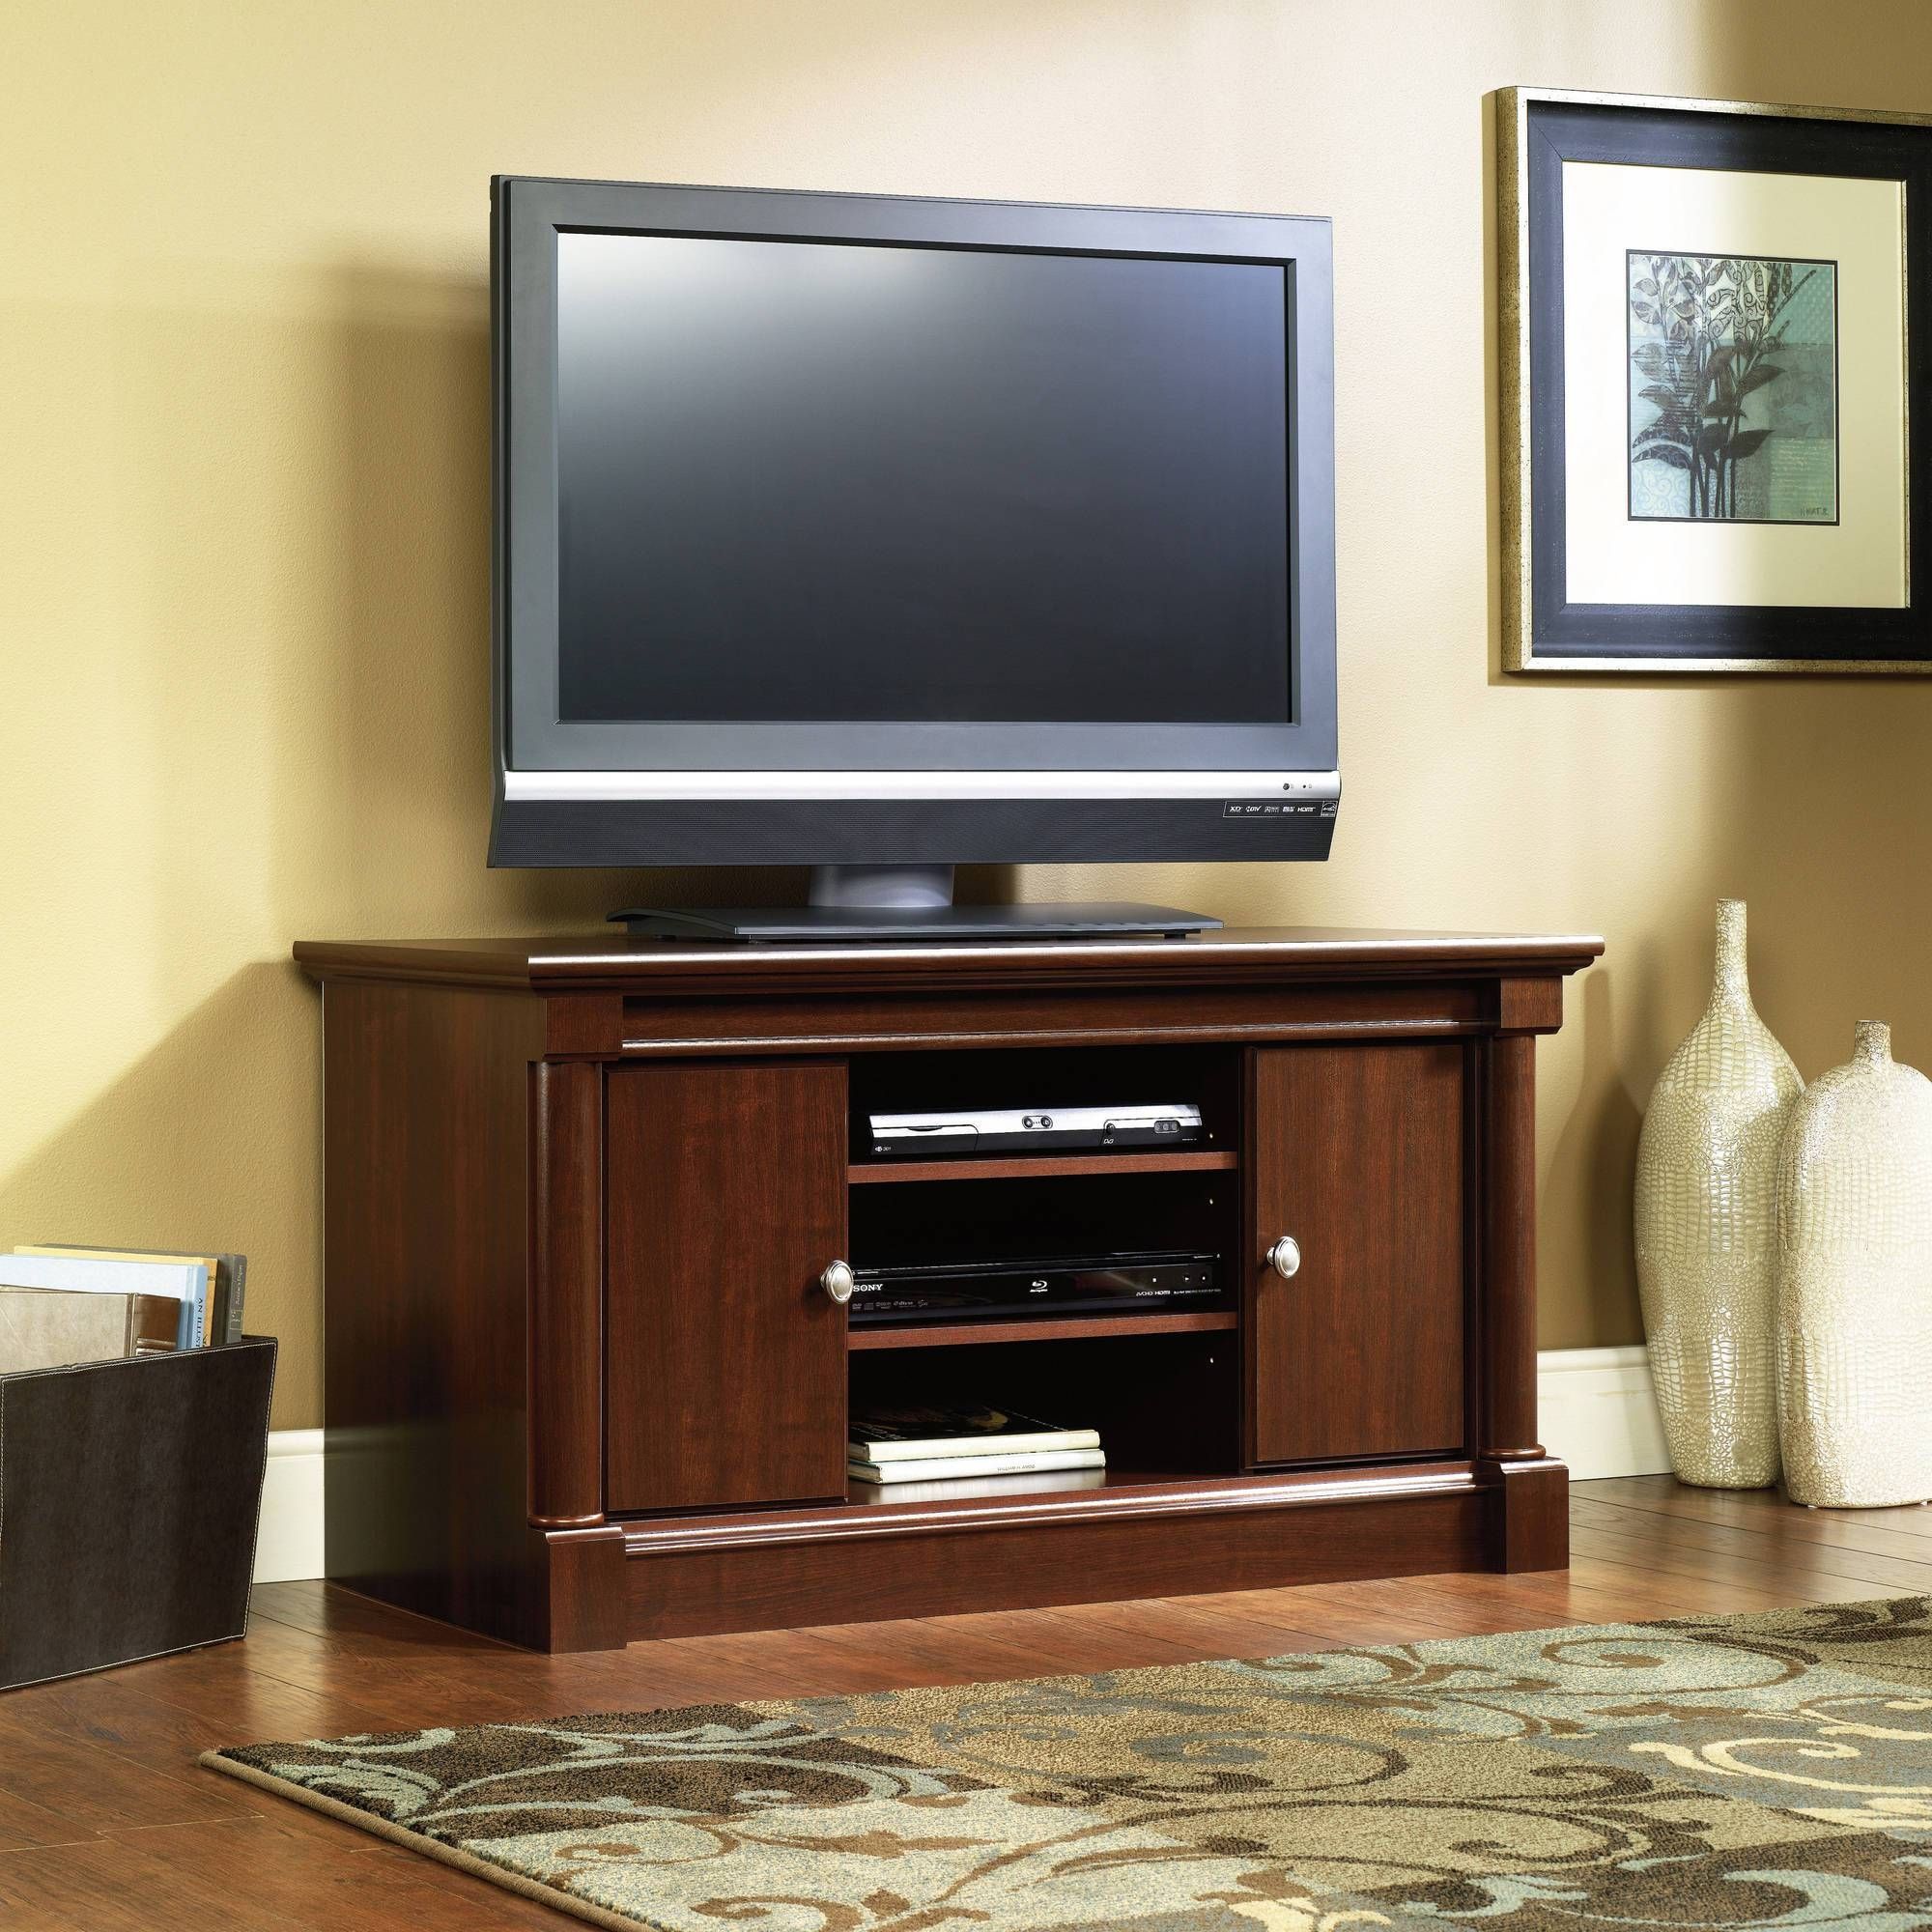 Sauder Palladia Mid Size Tv Stand In Cherry – Walmart Within Cherry Tv Stands (View 5 of 15)